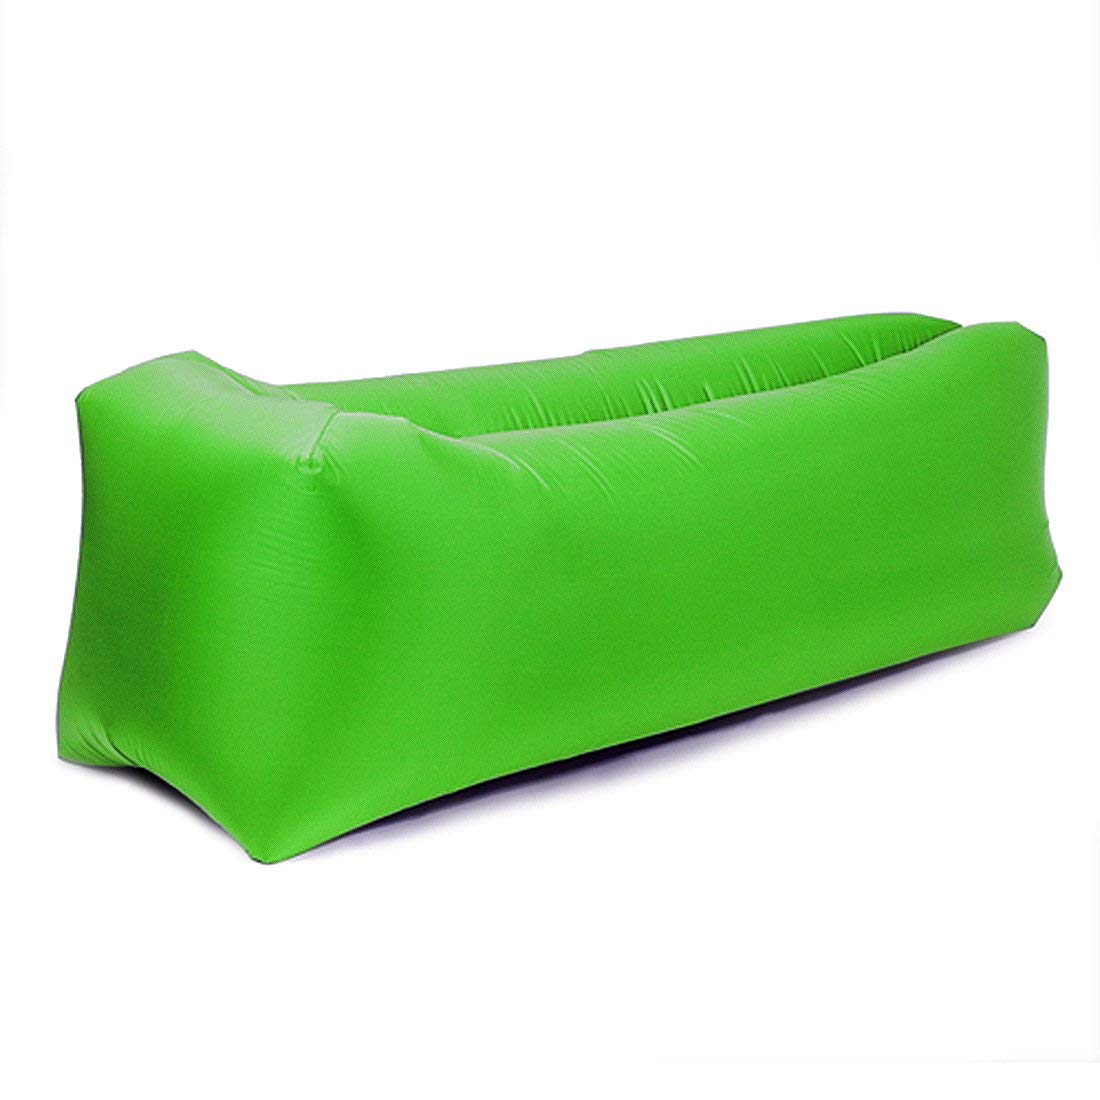 Sleeping Cloud Inflatable Lounger Bag Ripstop - Outdoor Hammock Portable Air Sofa Bag - Hangout Air Couch Sleeping Bag For Hiking Camping Picnics&amp;Music Festivals - Inflatable Sofas